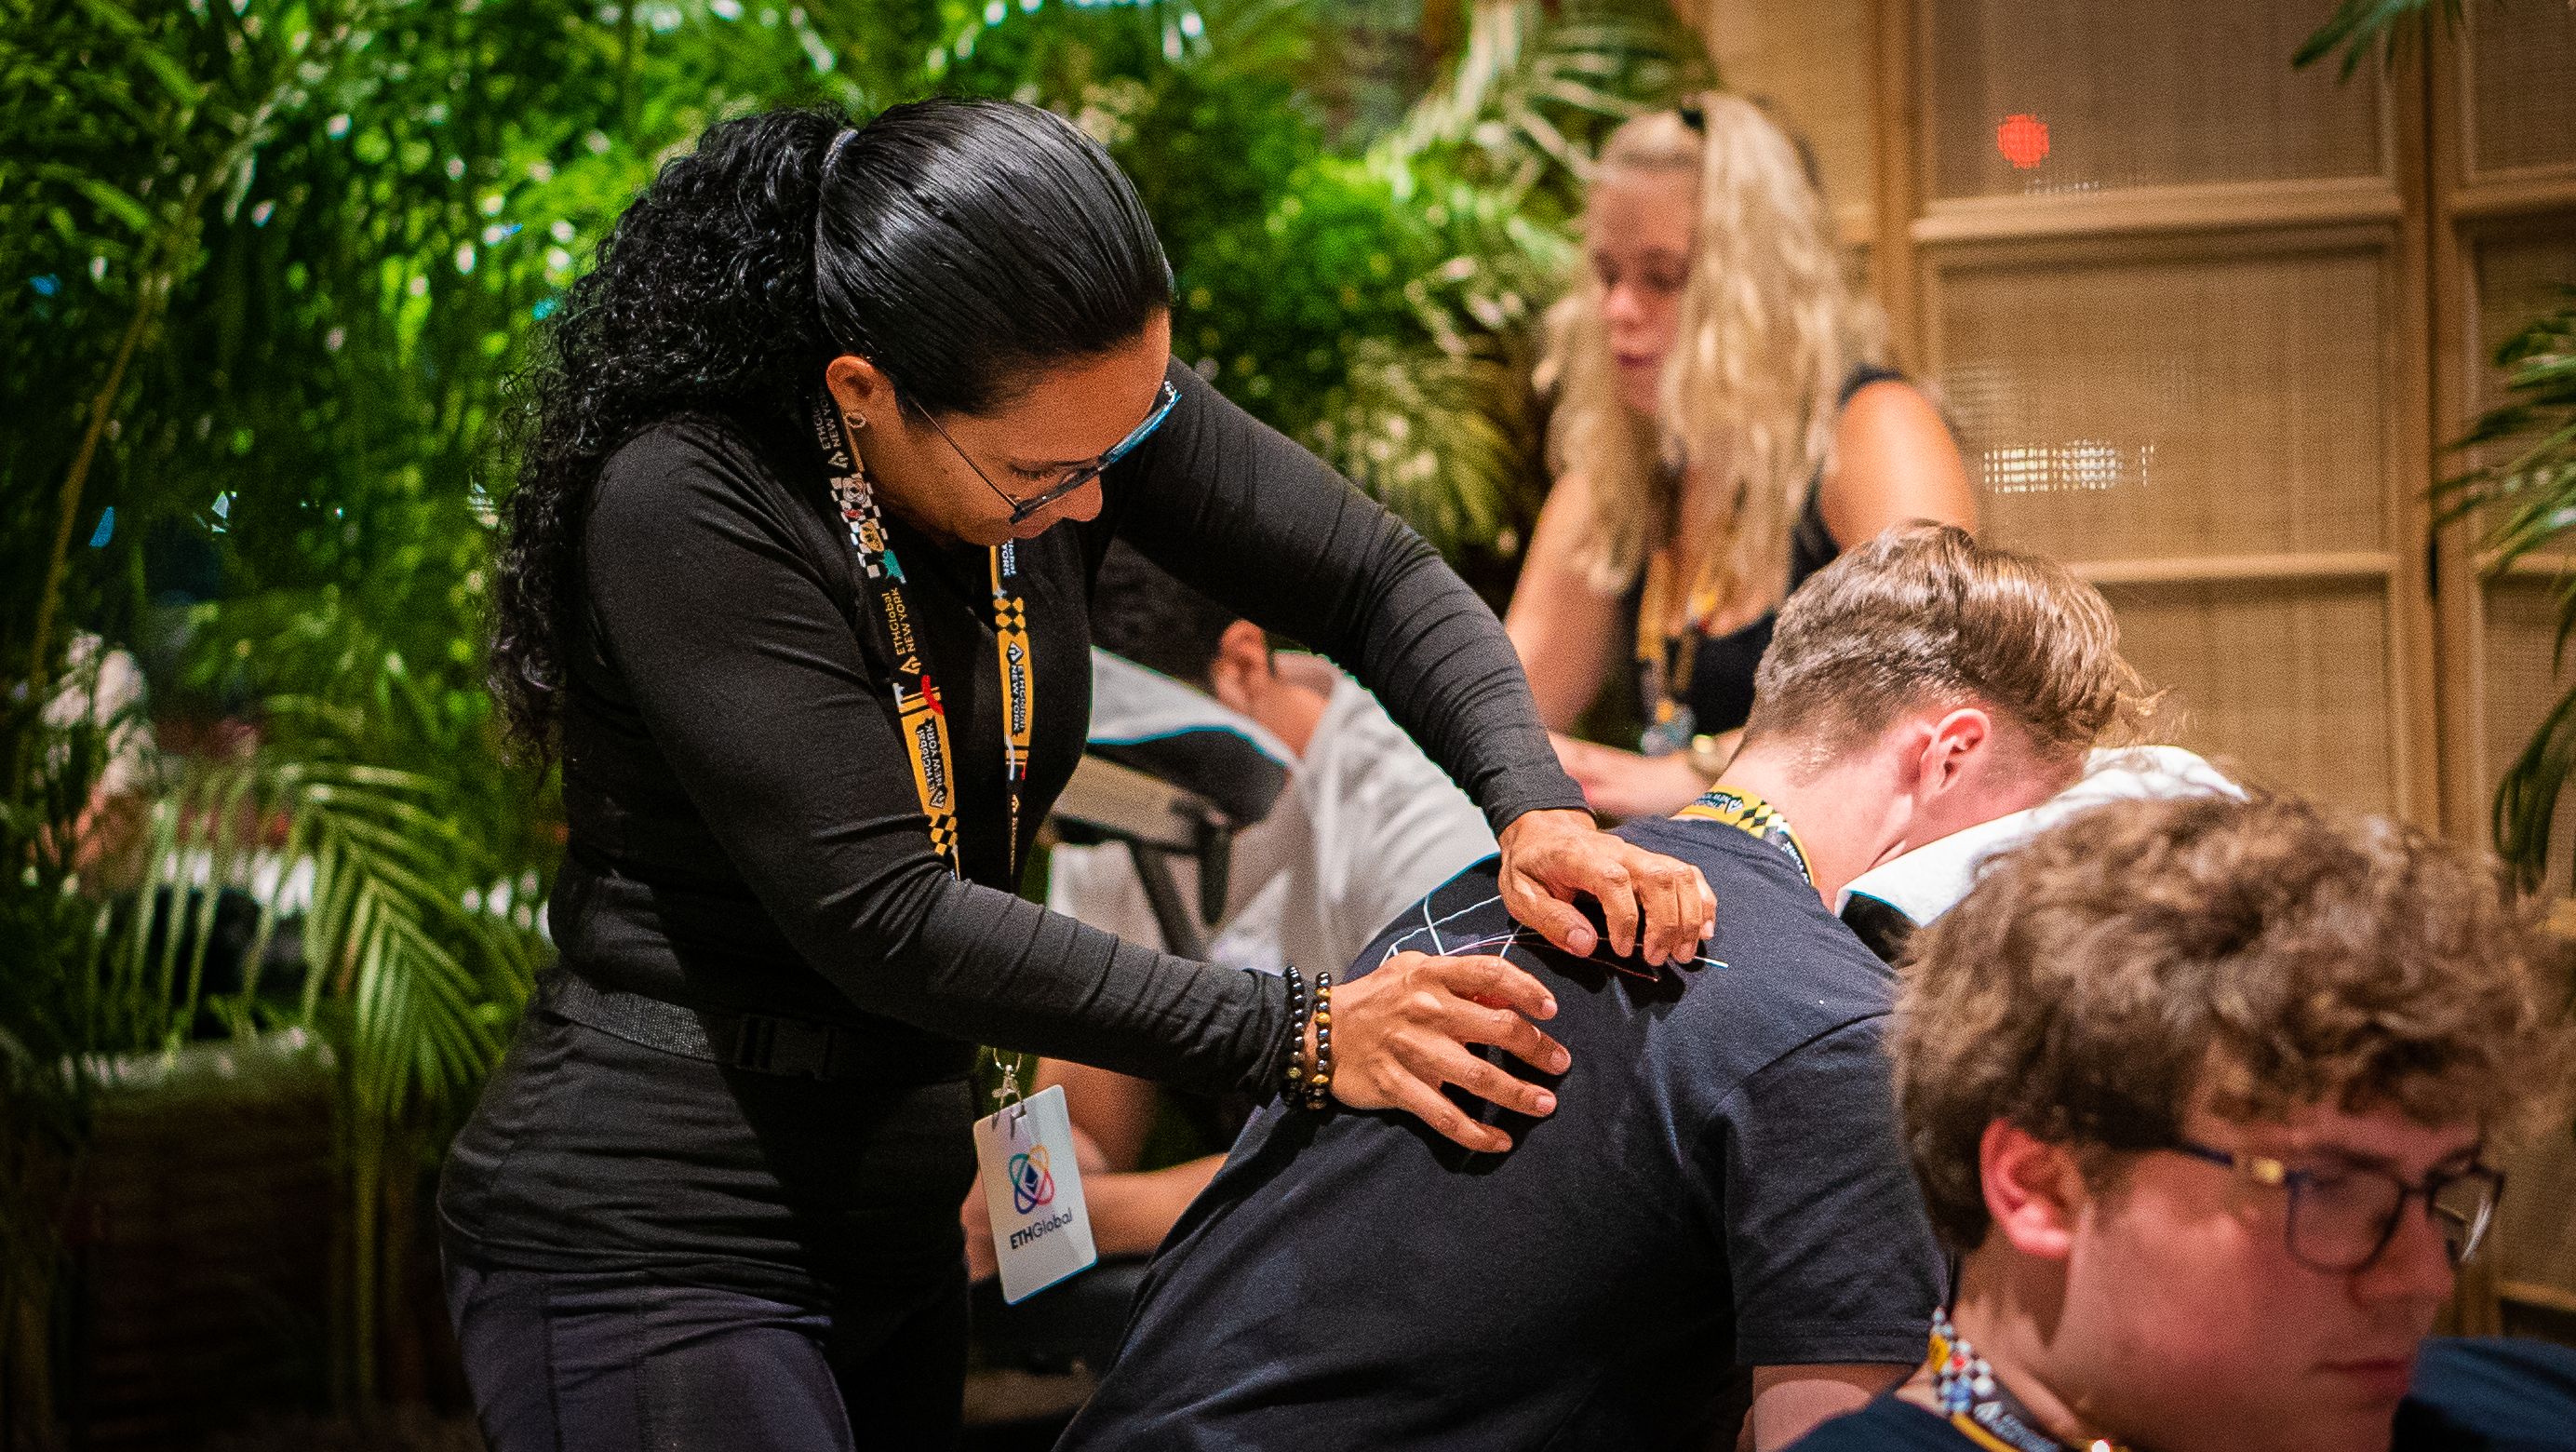 Cartesi had massage therapists on-site at ETHGlobal NYC ready to soothe those tense muscles!